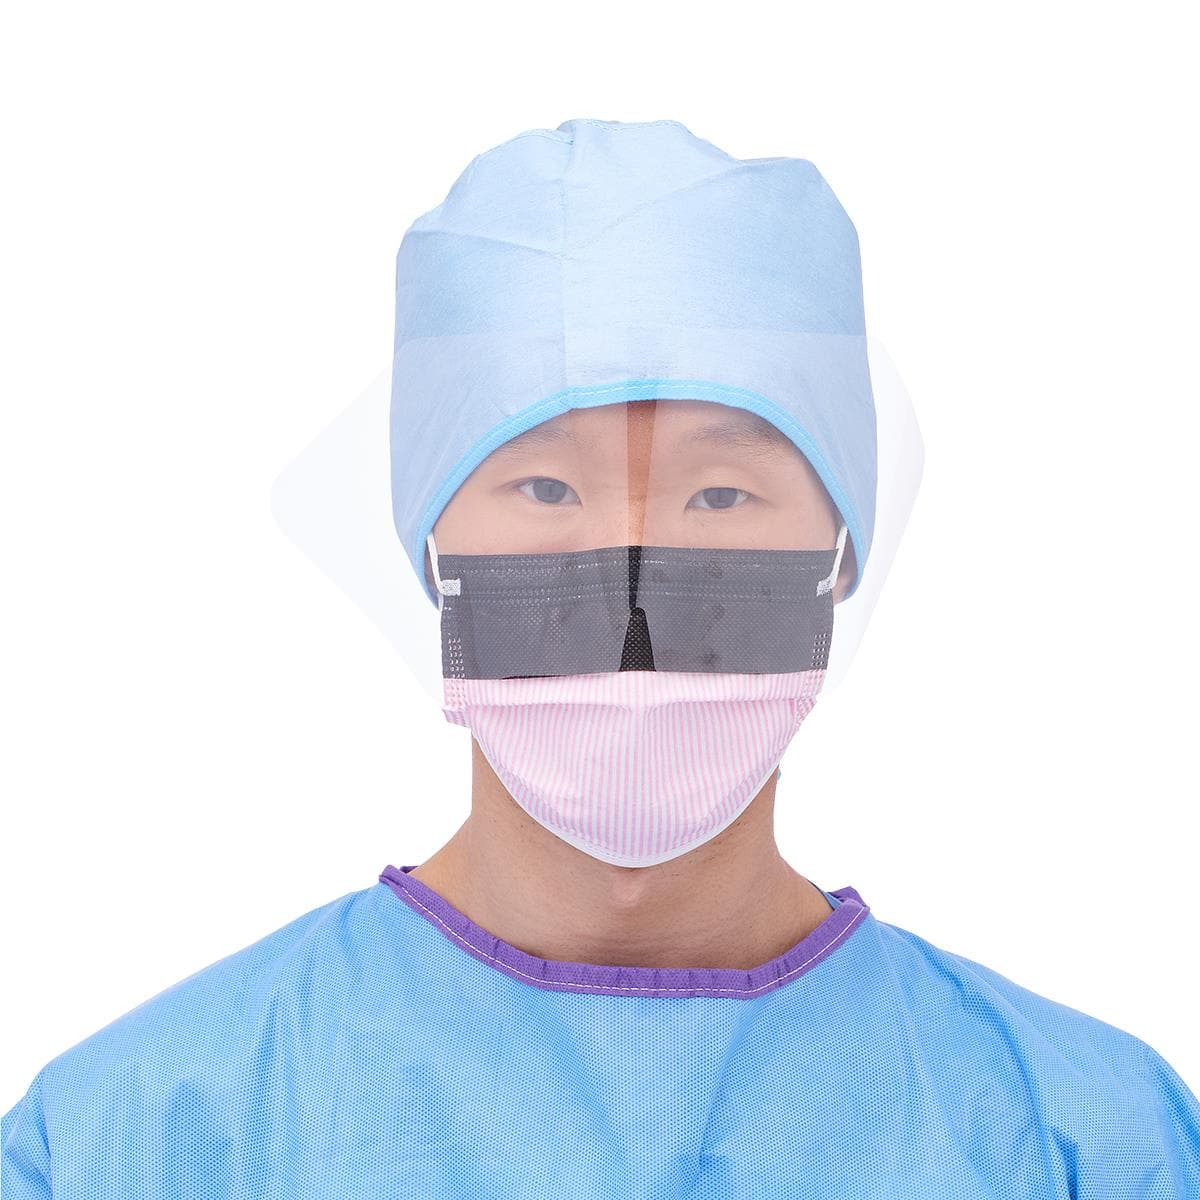 Medline Purple/White / Box of 25 Medline ASTM Level 3 Procedure Face Masks with Eye Shield and Ear Loops